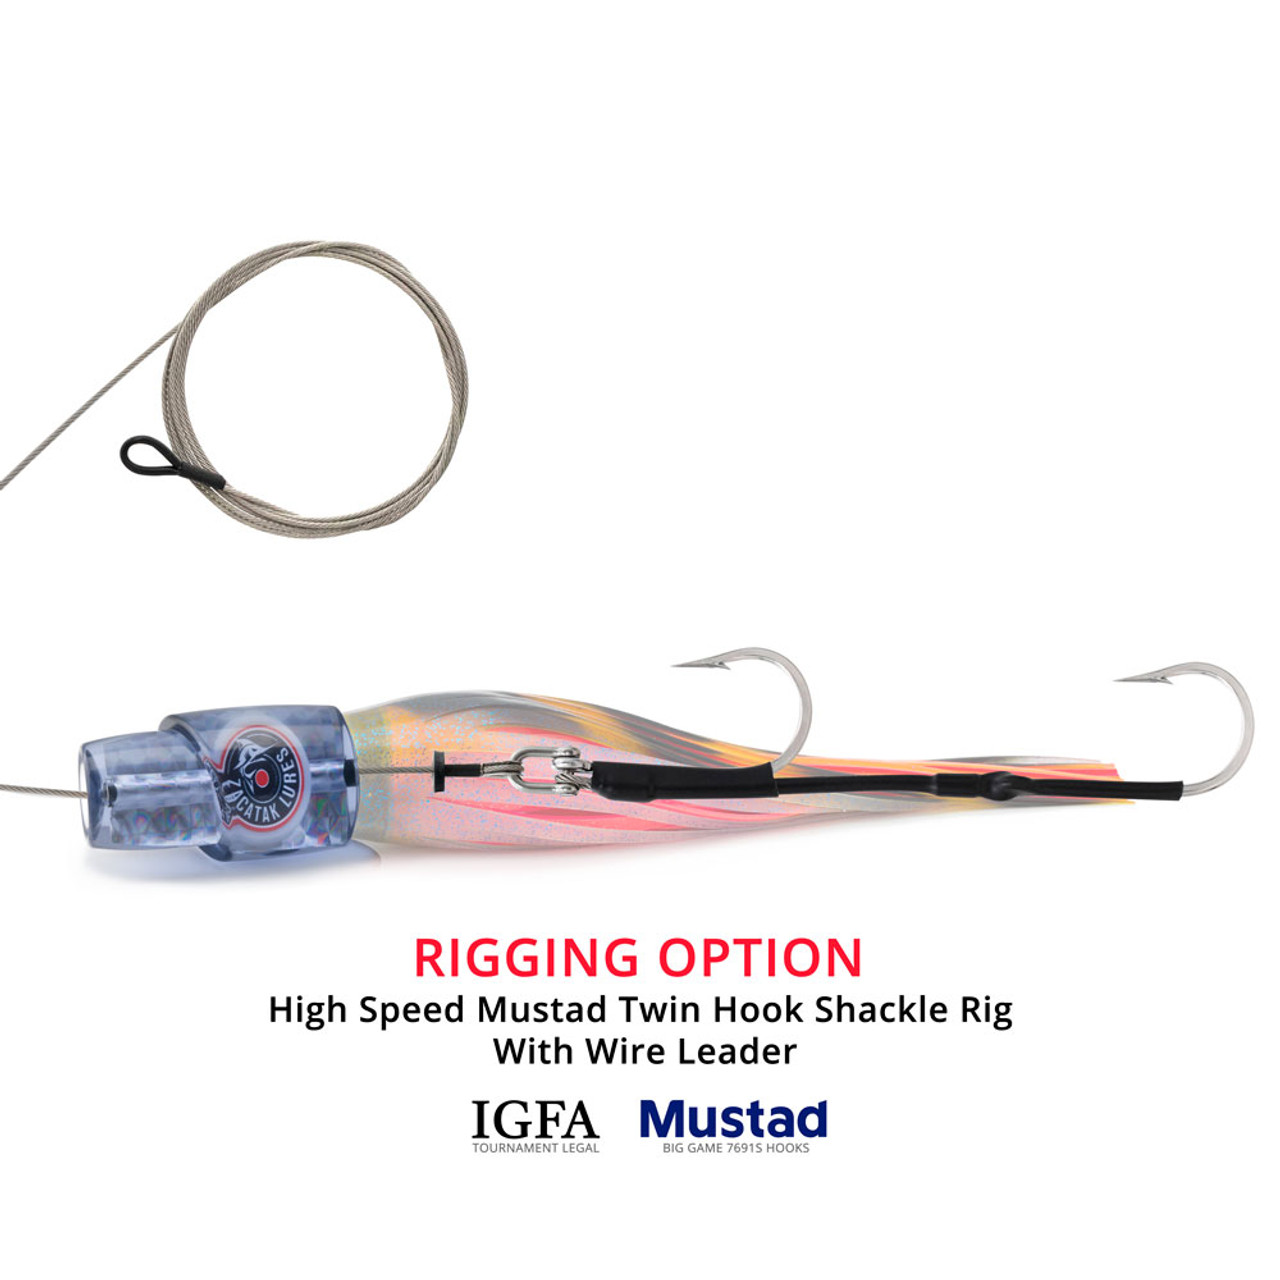 https://cdn11.bigcommerce.com/s-sv4r4mic/images/stencil/1280x1280/products/9275/50412/zacatak-lures-high-speed-rigging-option-twin-hook-shackle-rig-thunderstruck__20342.1671434105.jpg?c=2?imbypass=on